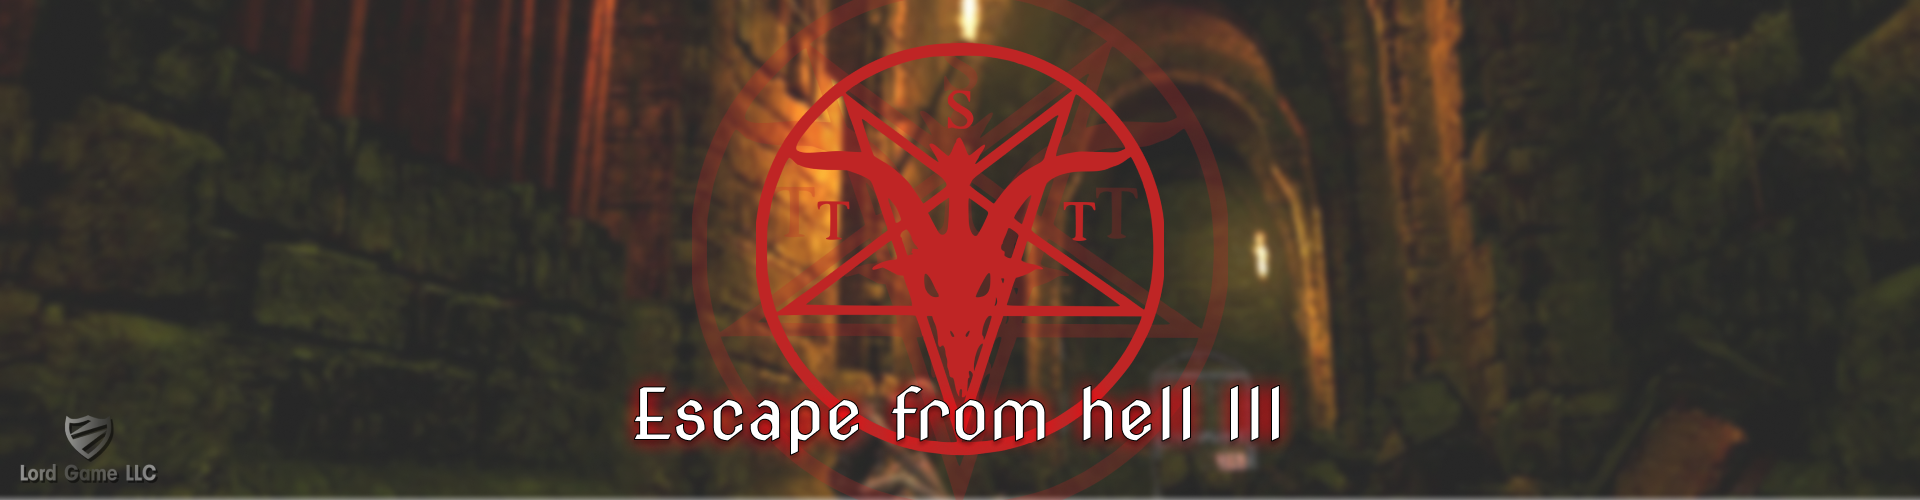 Escape from hell III [HTML5]